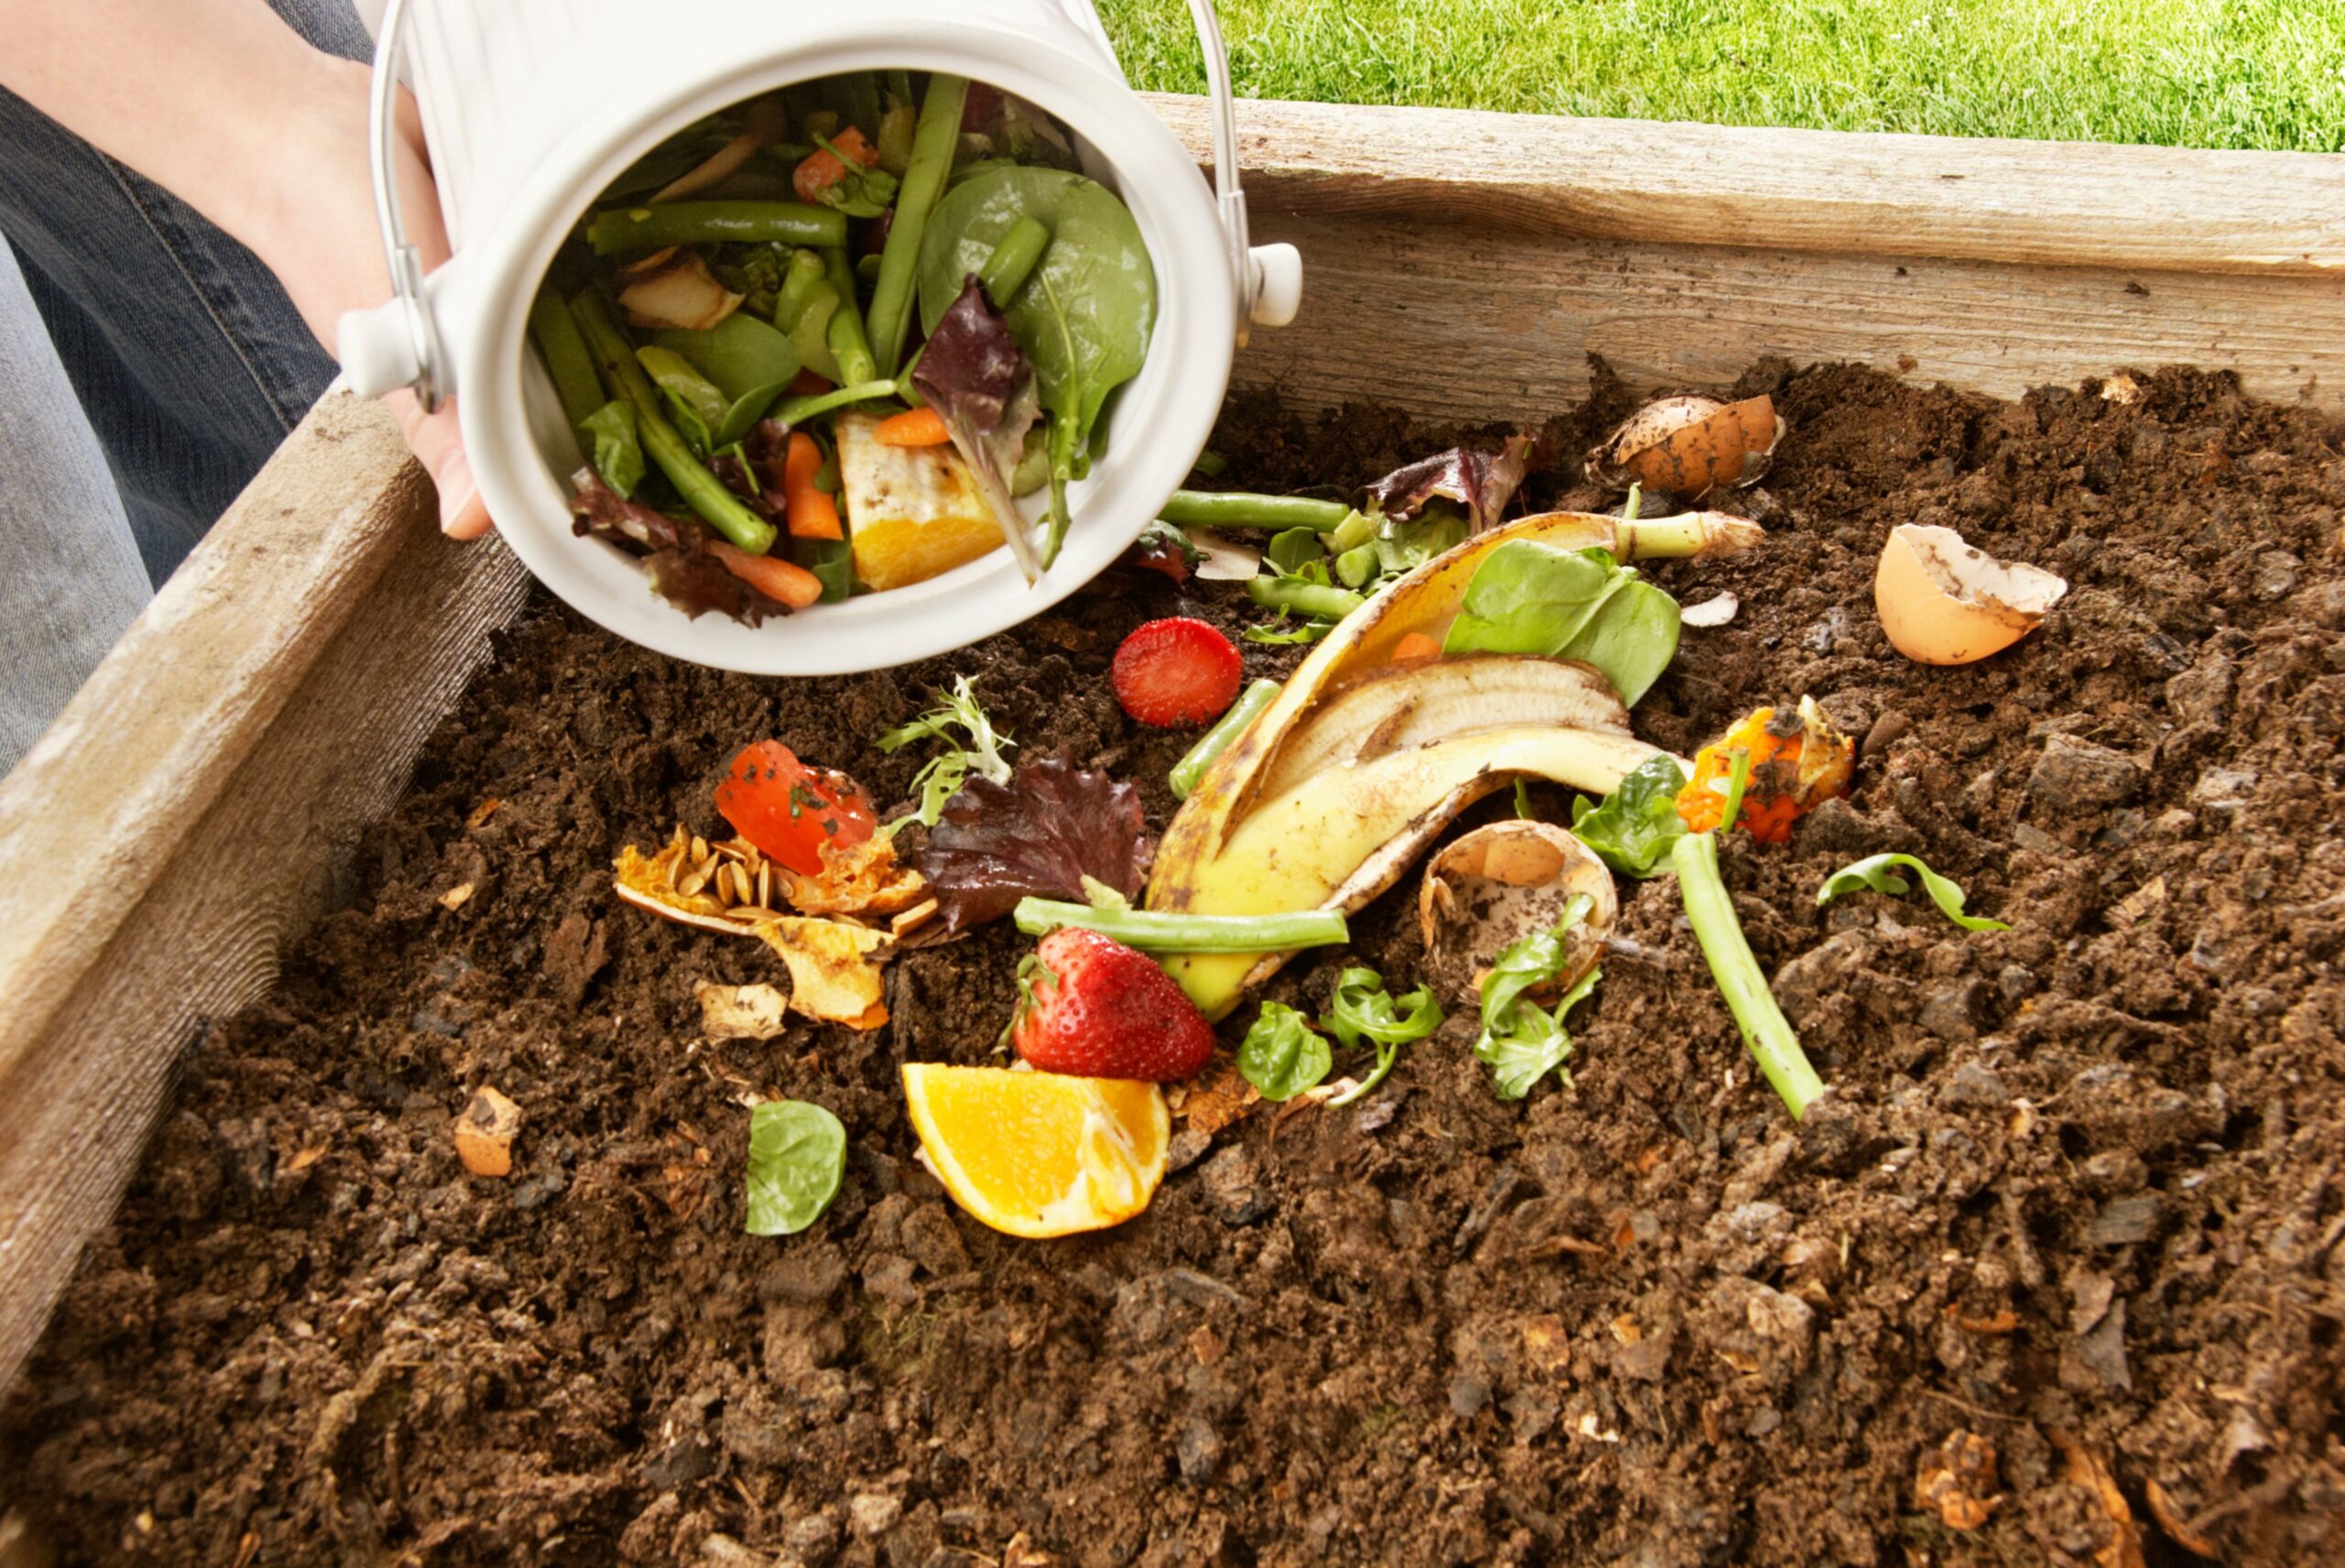 Composting and Garden Worms for Sale  Largest Selection of Worms and  Supplies Online!